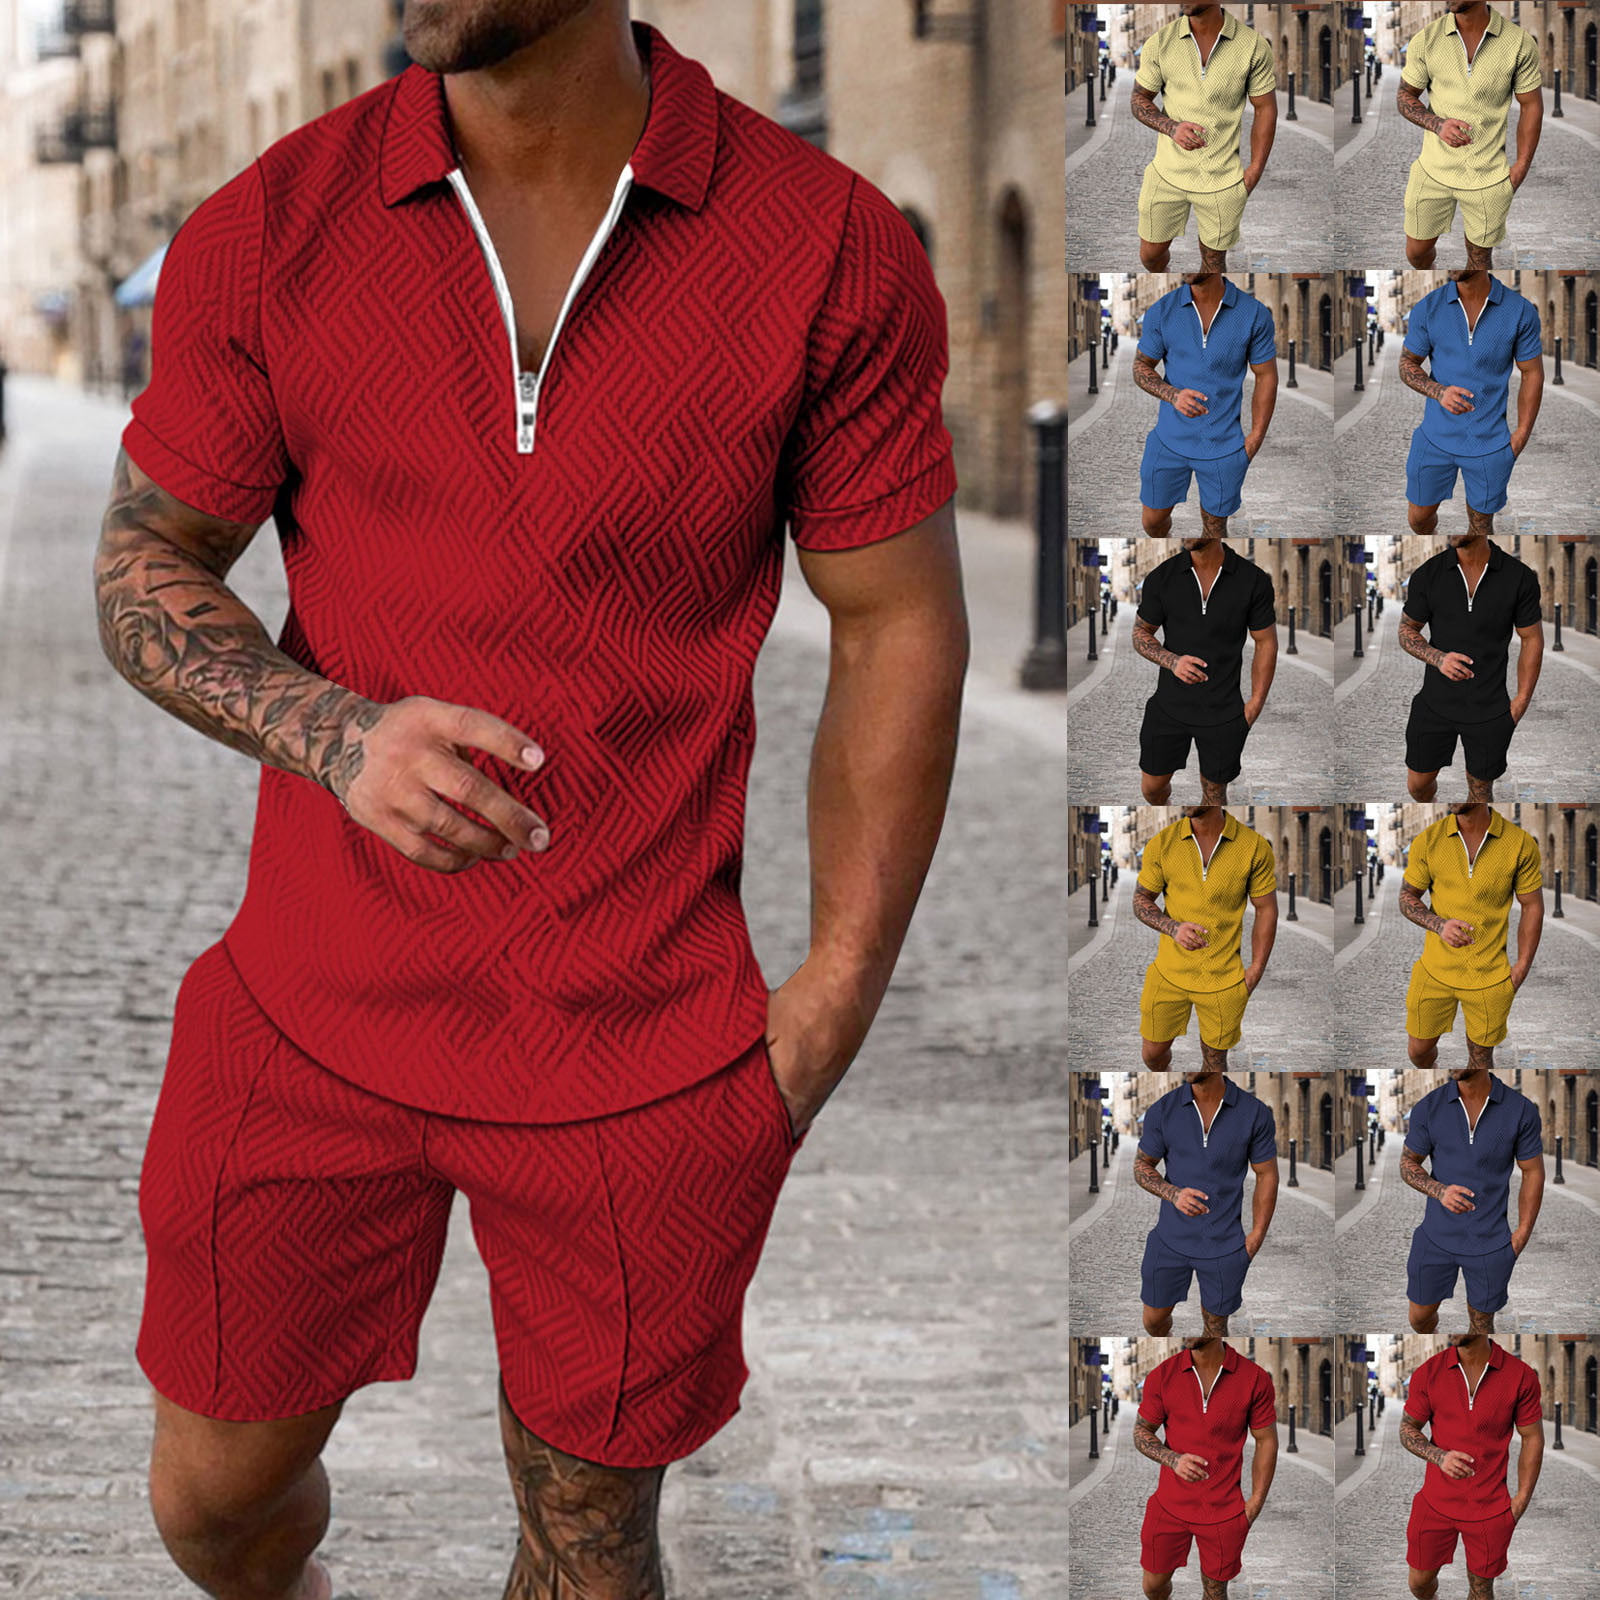 JoZorro Mens Polo Shirts and Shorts Set Tracksuit Fashion Casual Summer 2 Piece Outfits for Men